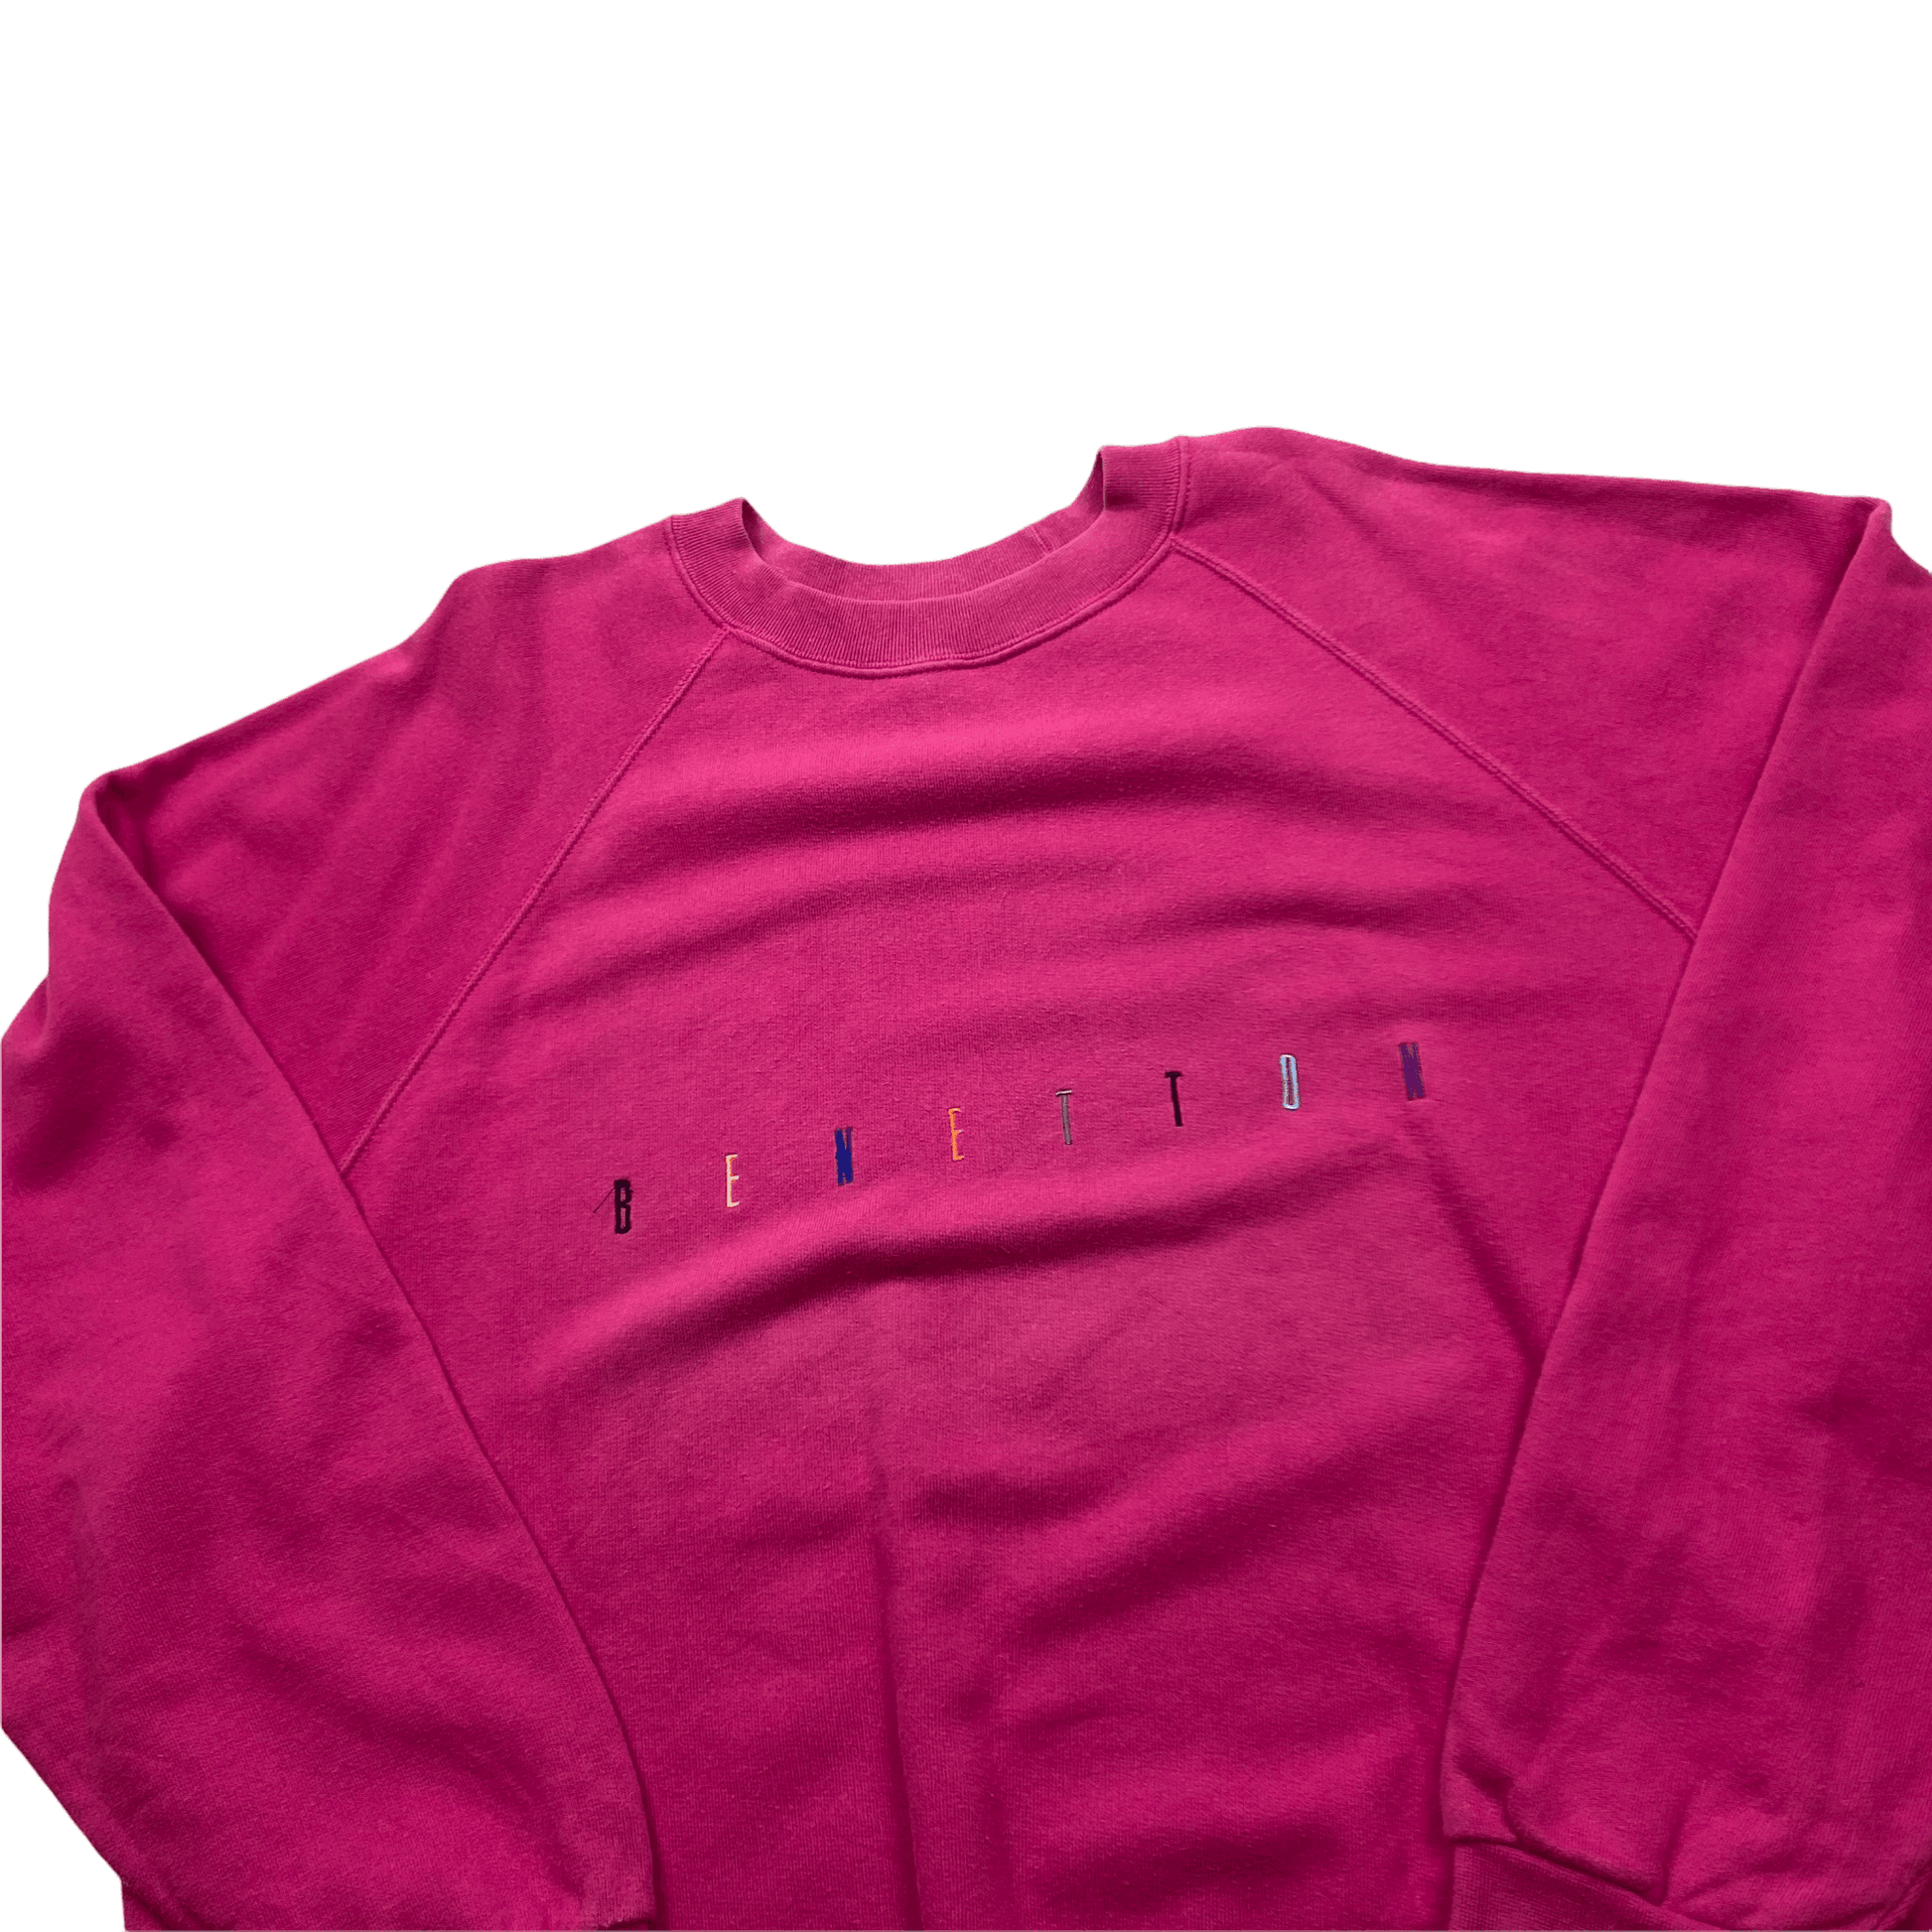 Vintage 90s Pink United Colours of Benetton Spell-Out Sweatshirt - Extra Large - The Streetwear Studio